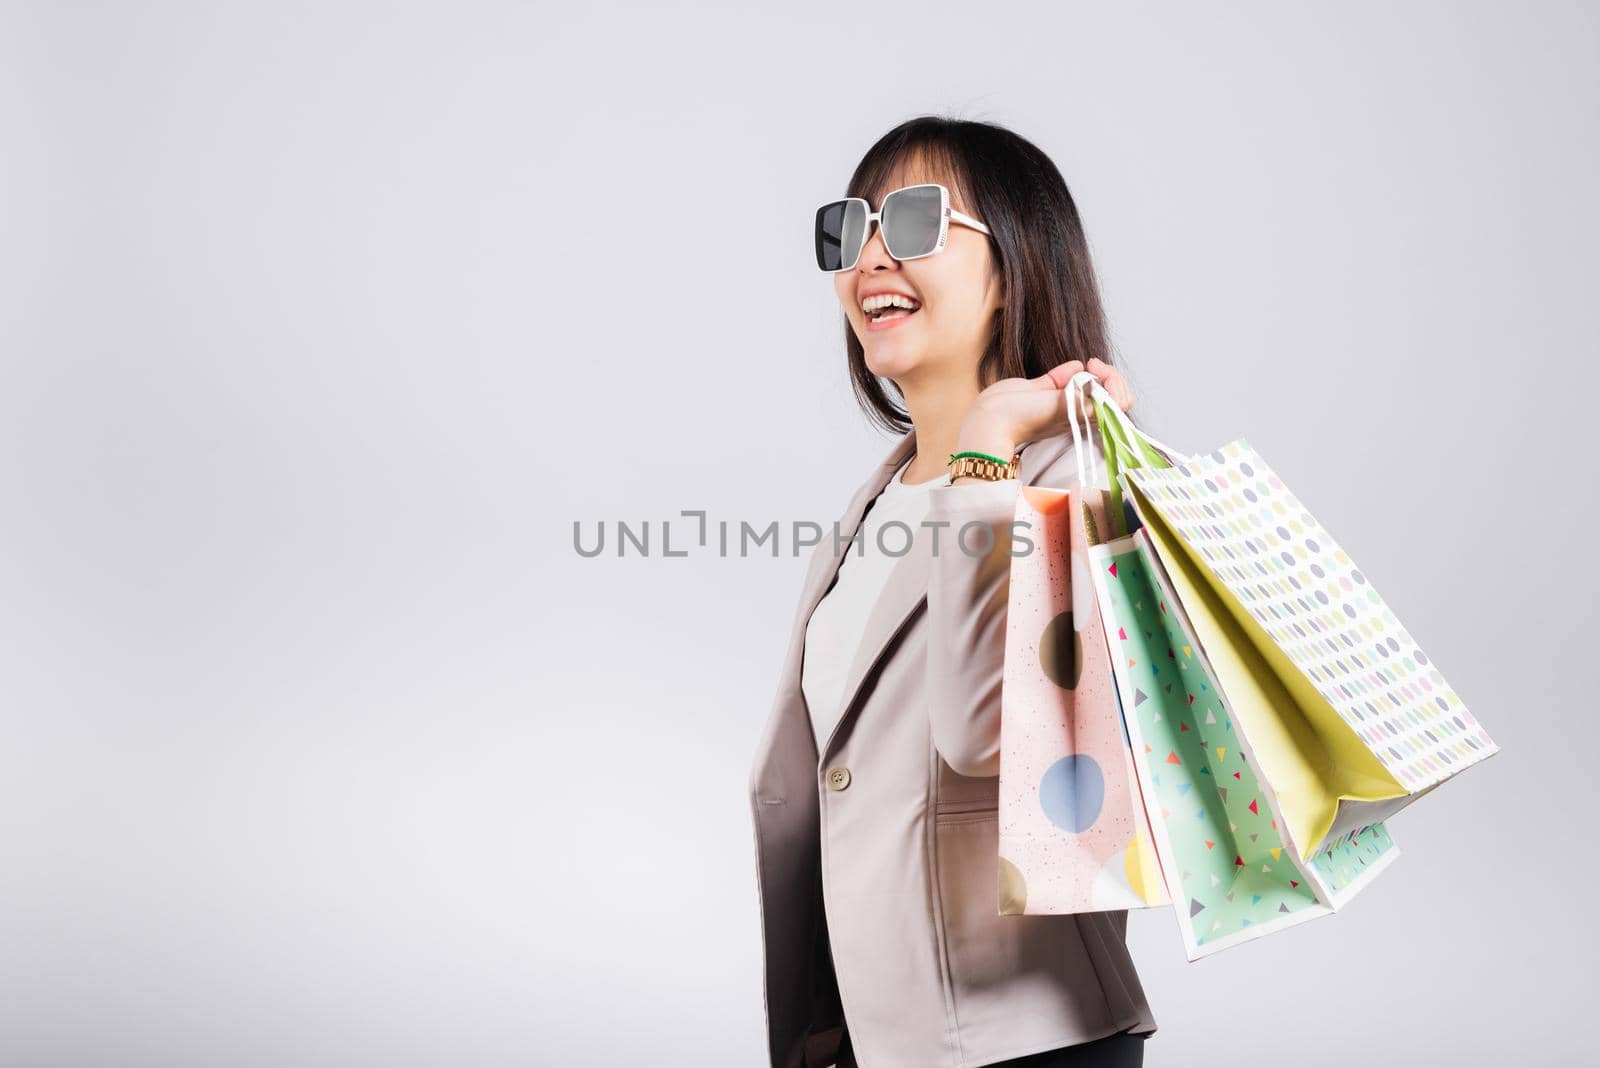 Happy woman with glasses confident shopper smiling holding online shopping bags colorful multicolor, Portrait excited Asian young female purchase studio shot isolated on white background, fashion sale